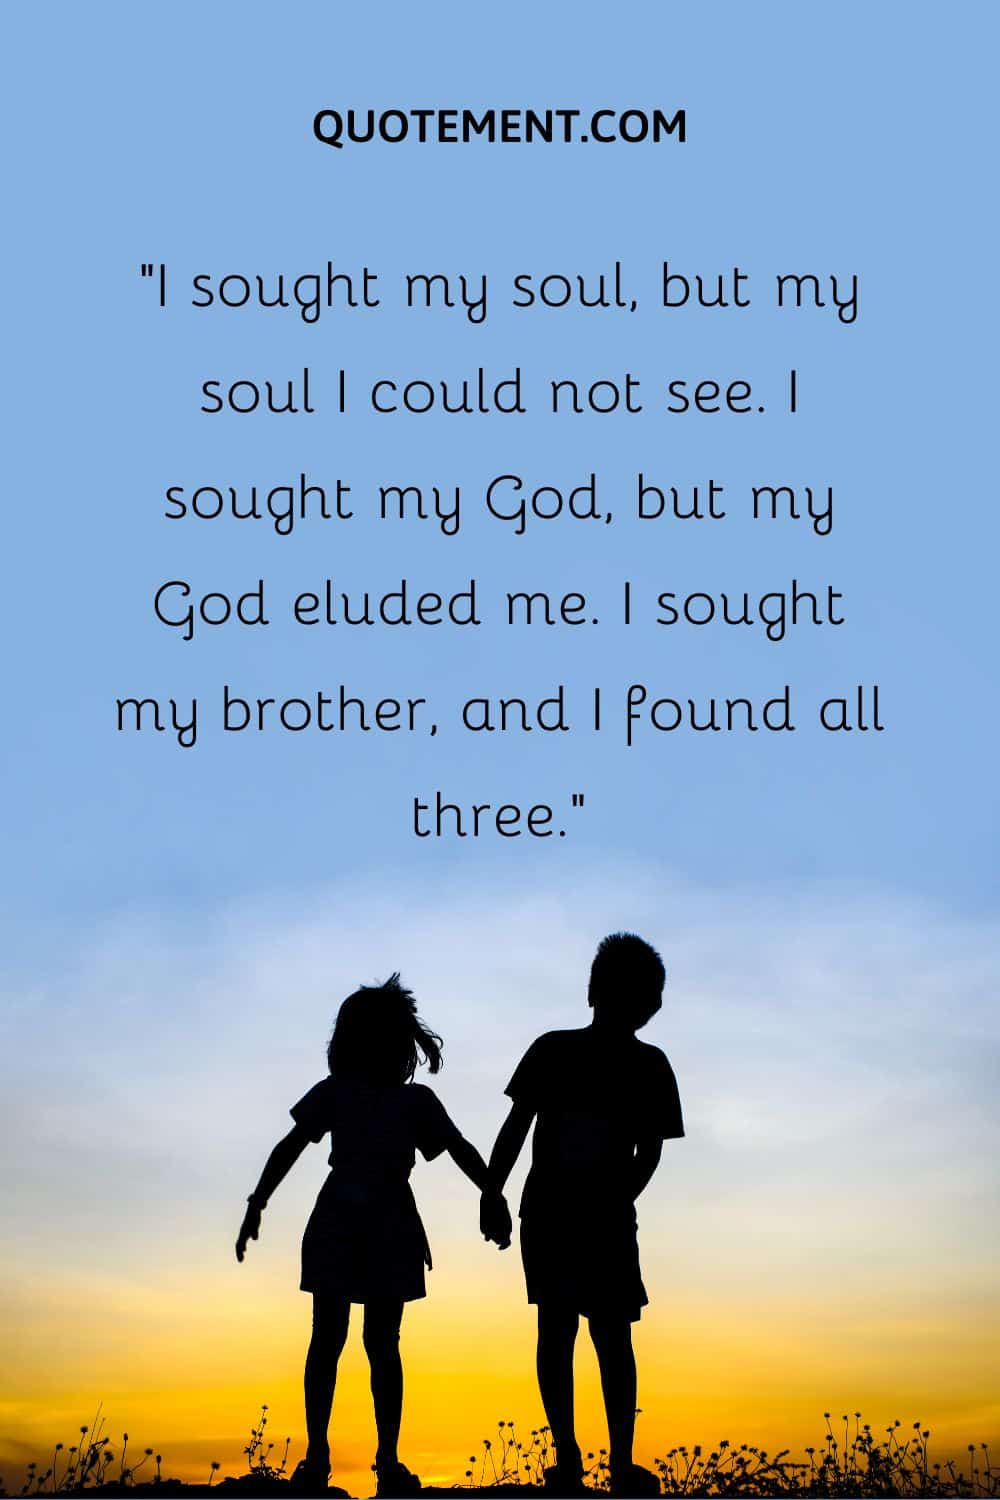 “I sought my soul, but my soul I could not see. I sought my God, but my God eluded me. I sought my brother, and I found all three.”